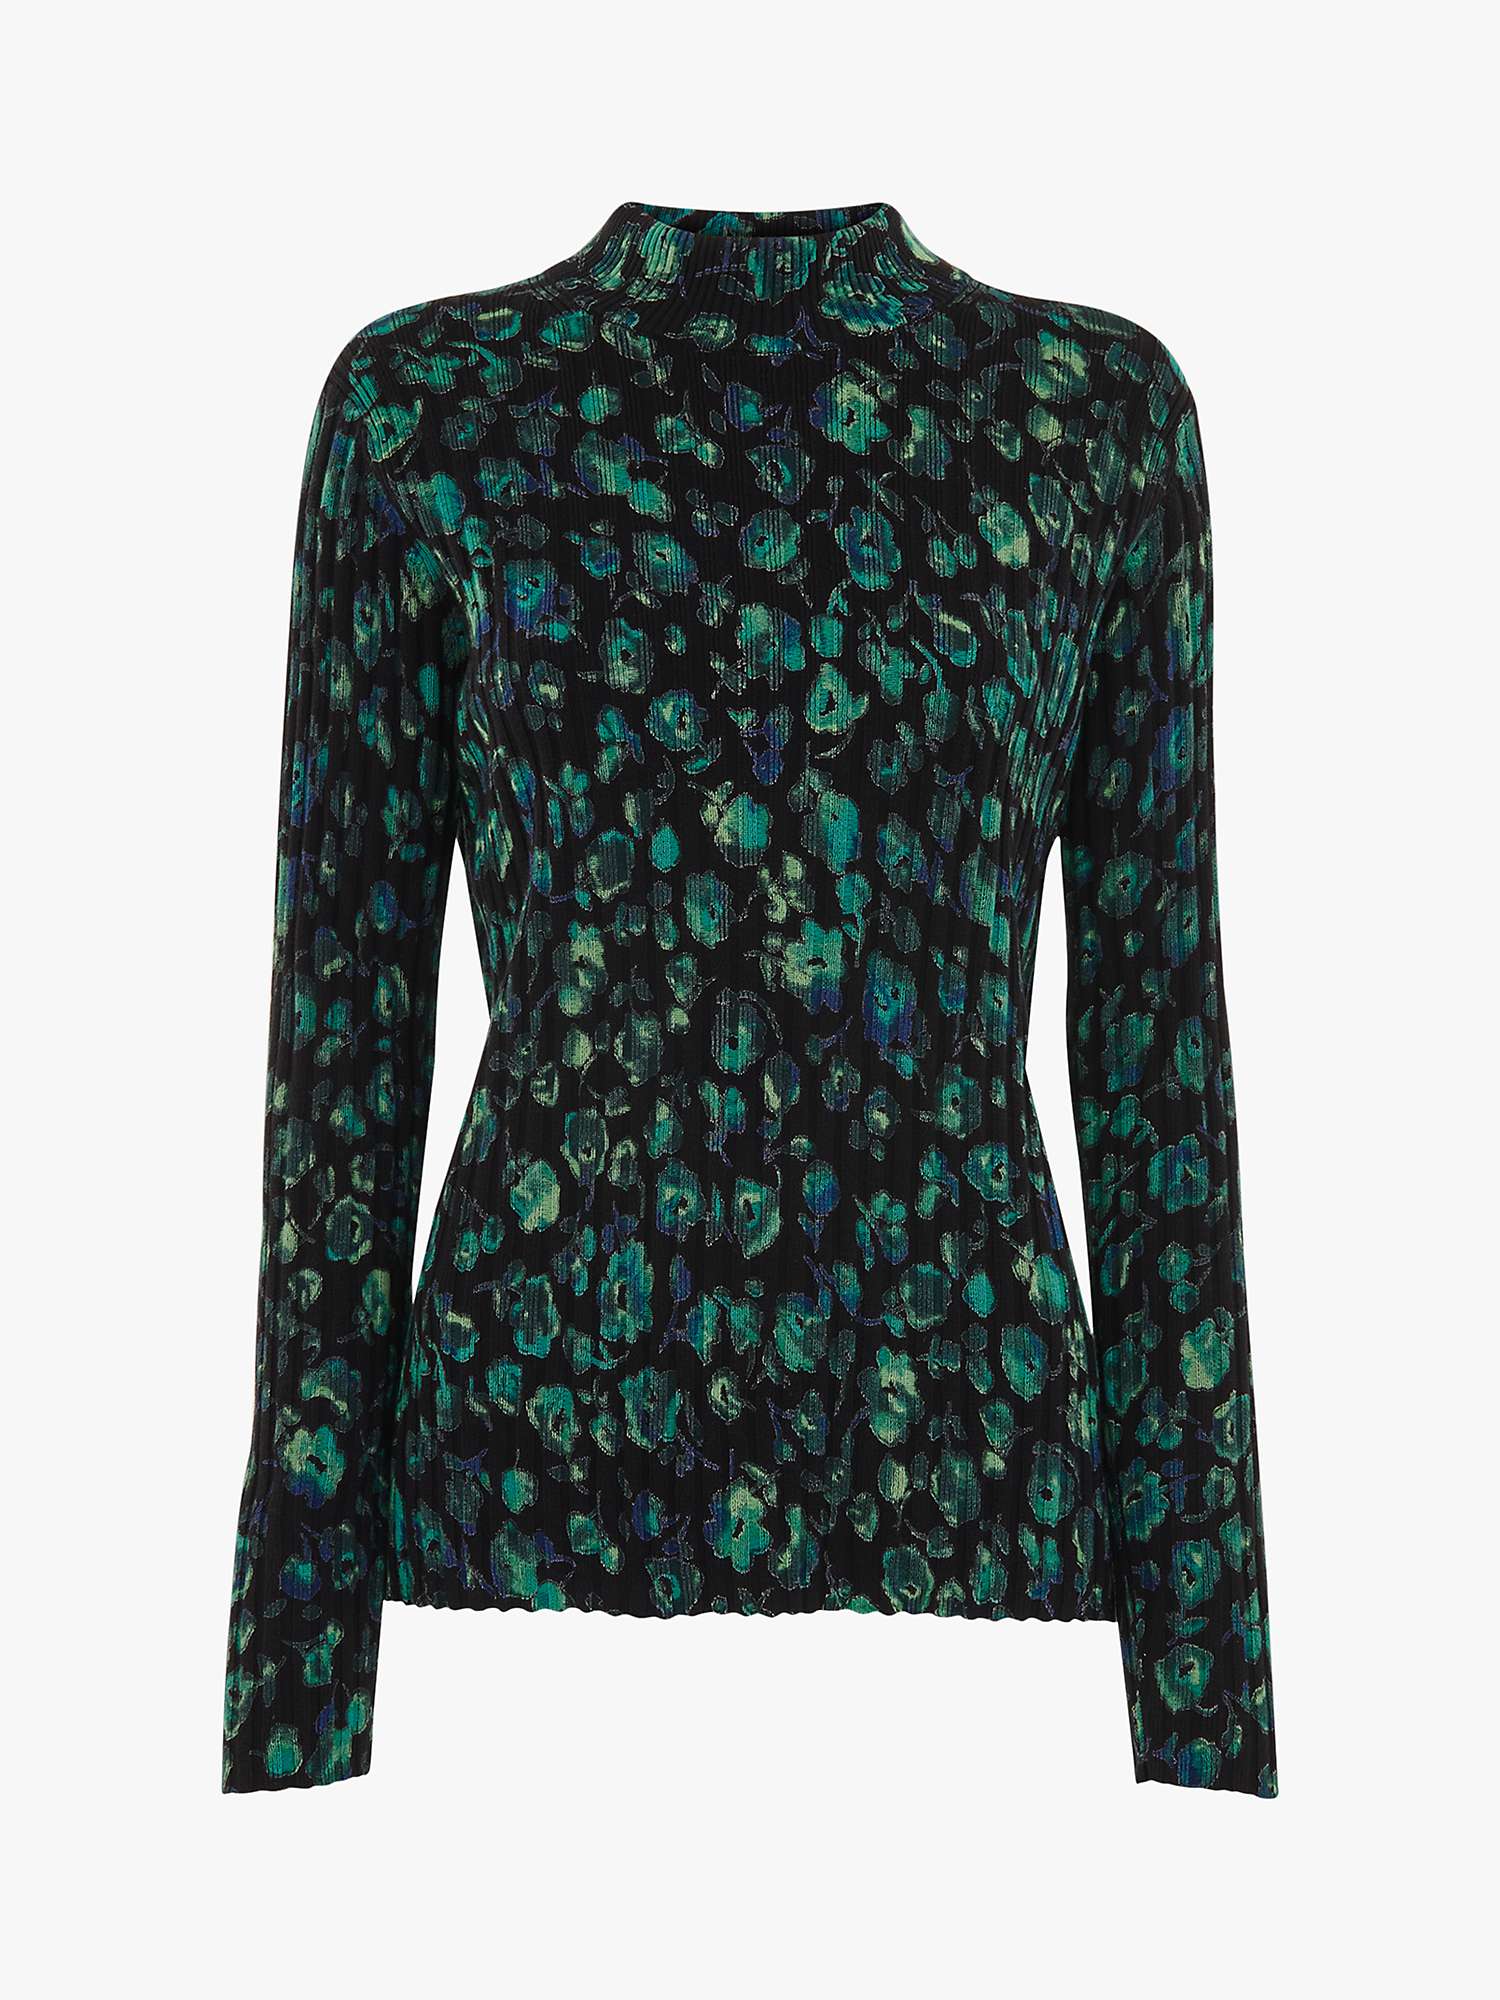 Whistles Blurred Floral Knit Top, Black/Multi at John Lewis & Partners